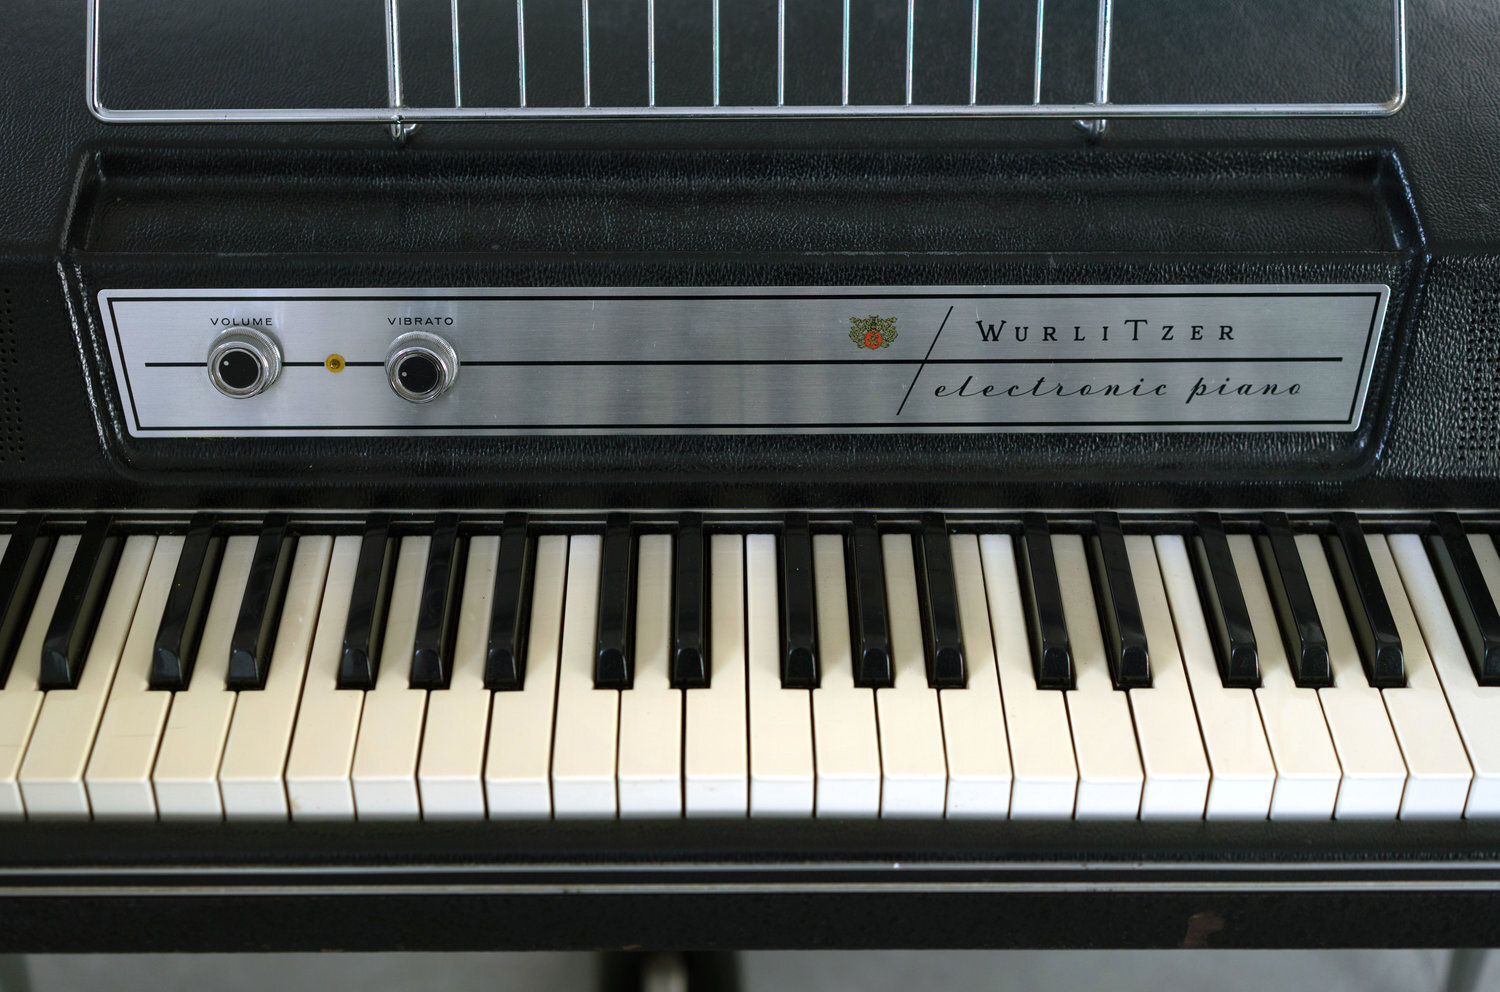 What is the difference between a Wurlitzer 200 and a Wurlitzer 200a?